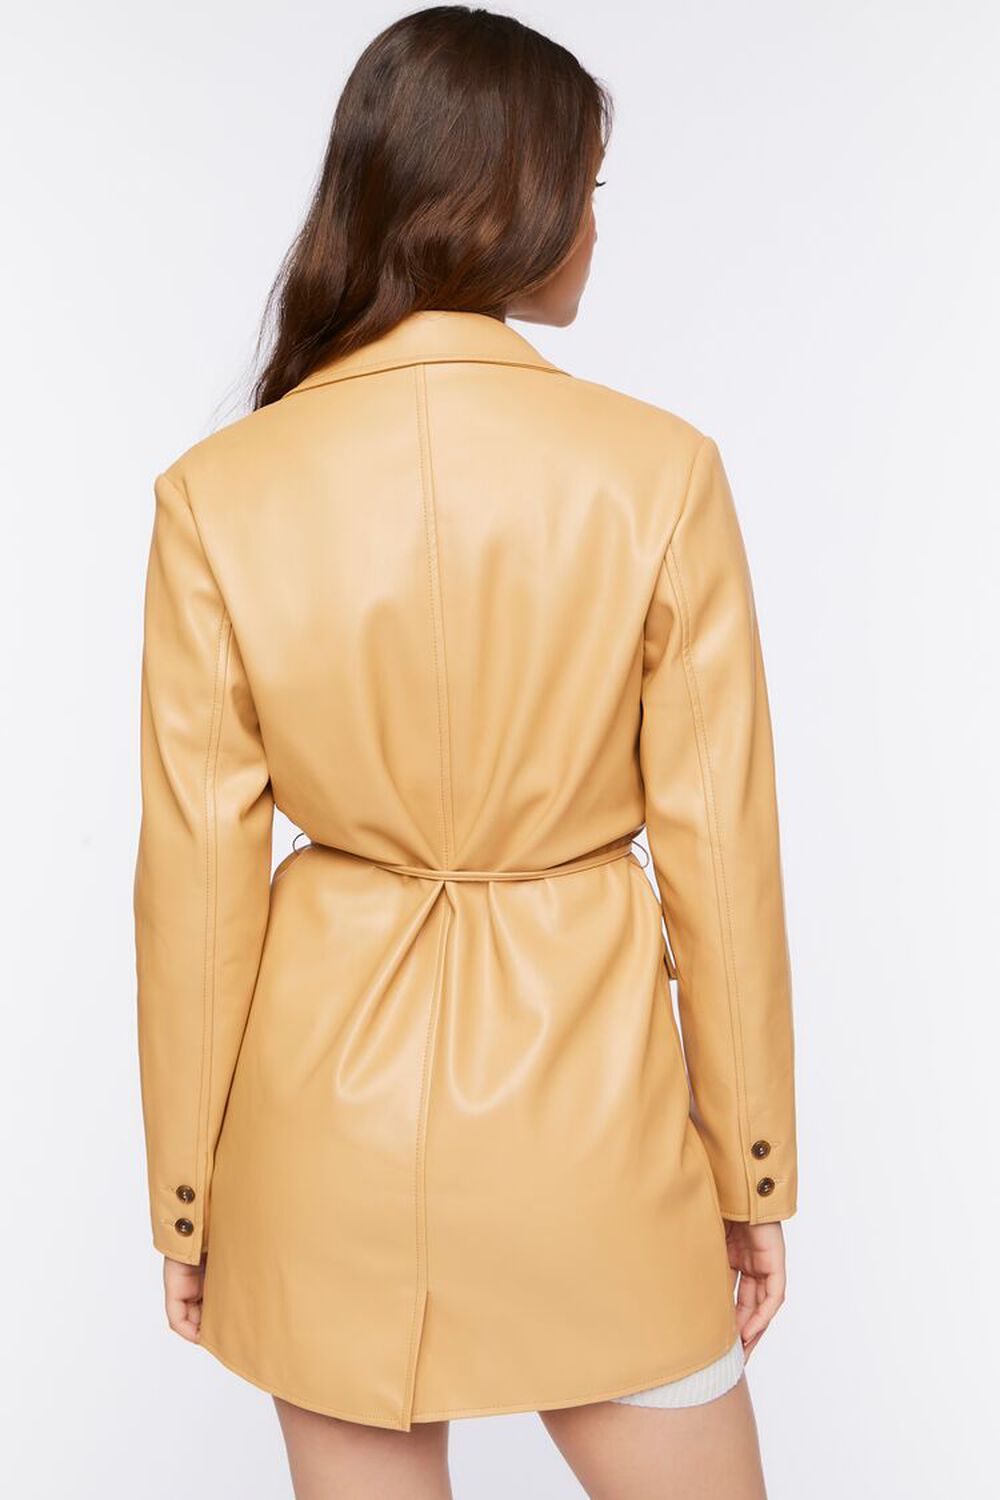 TAN Faux Leather Belted Blazer, image 3